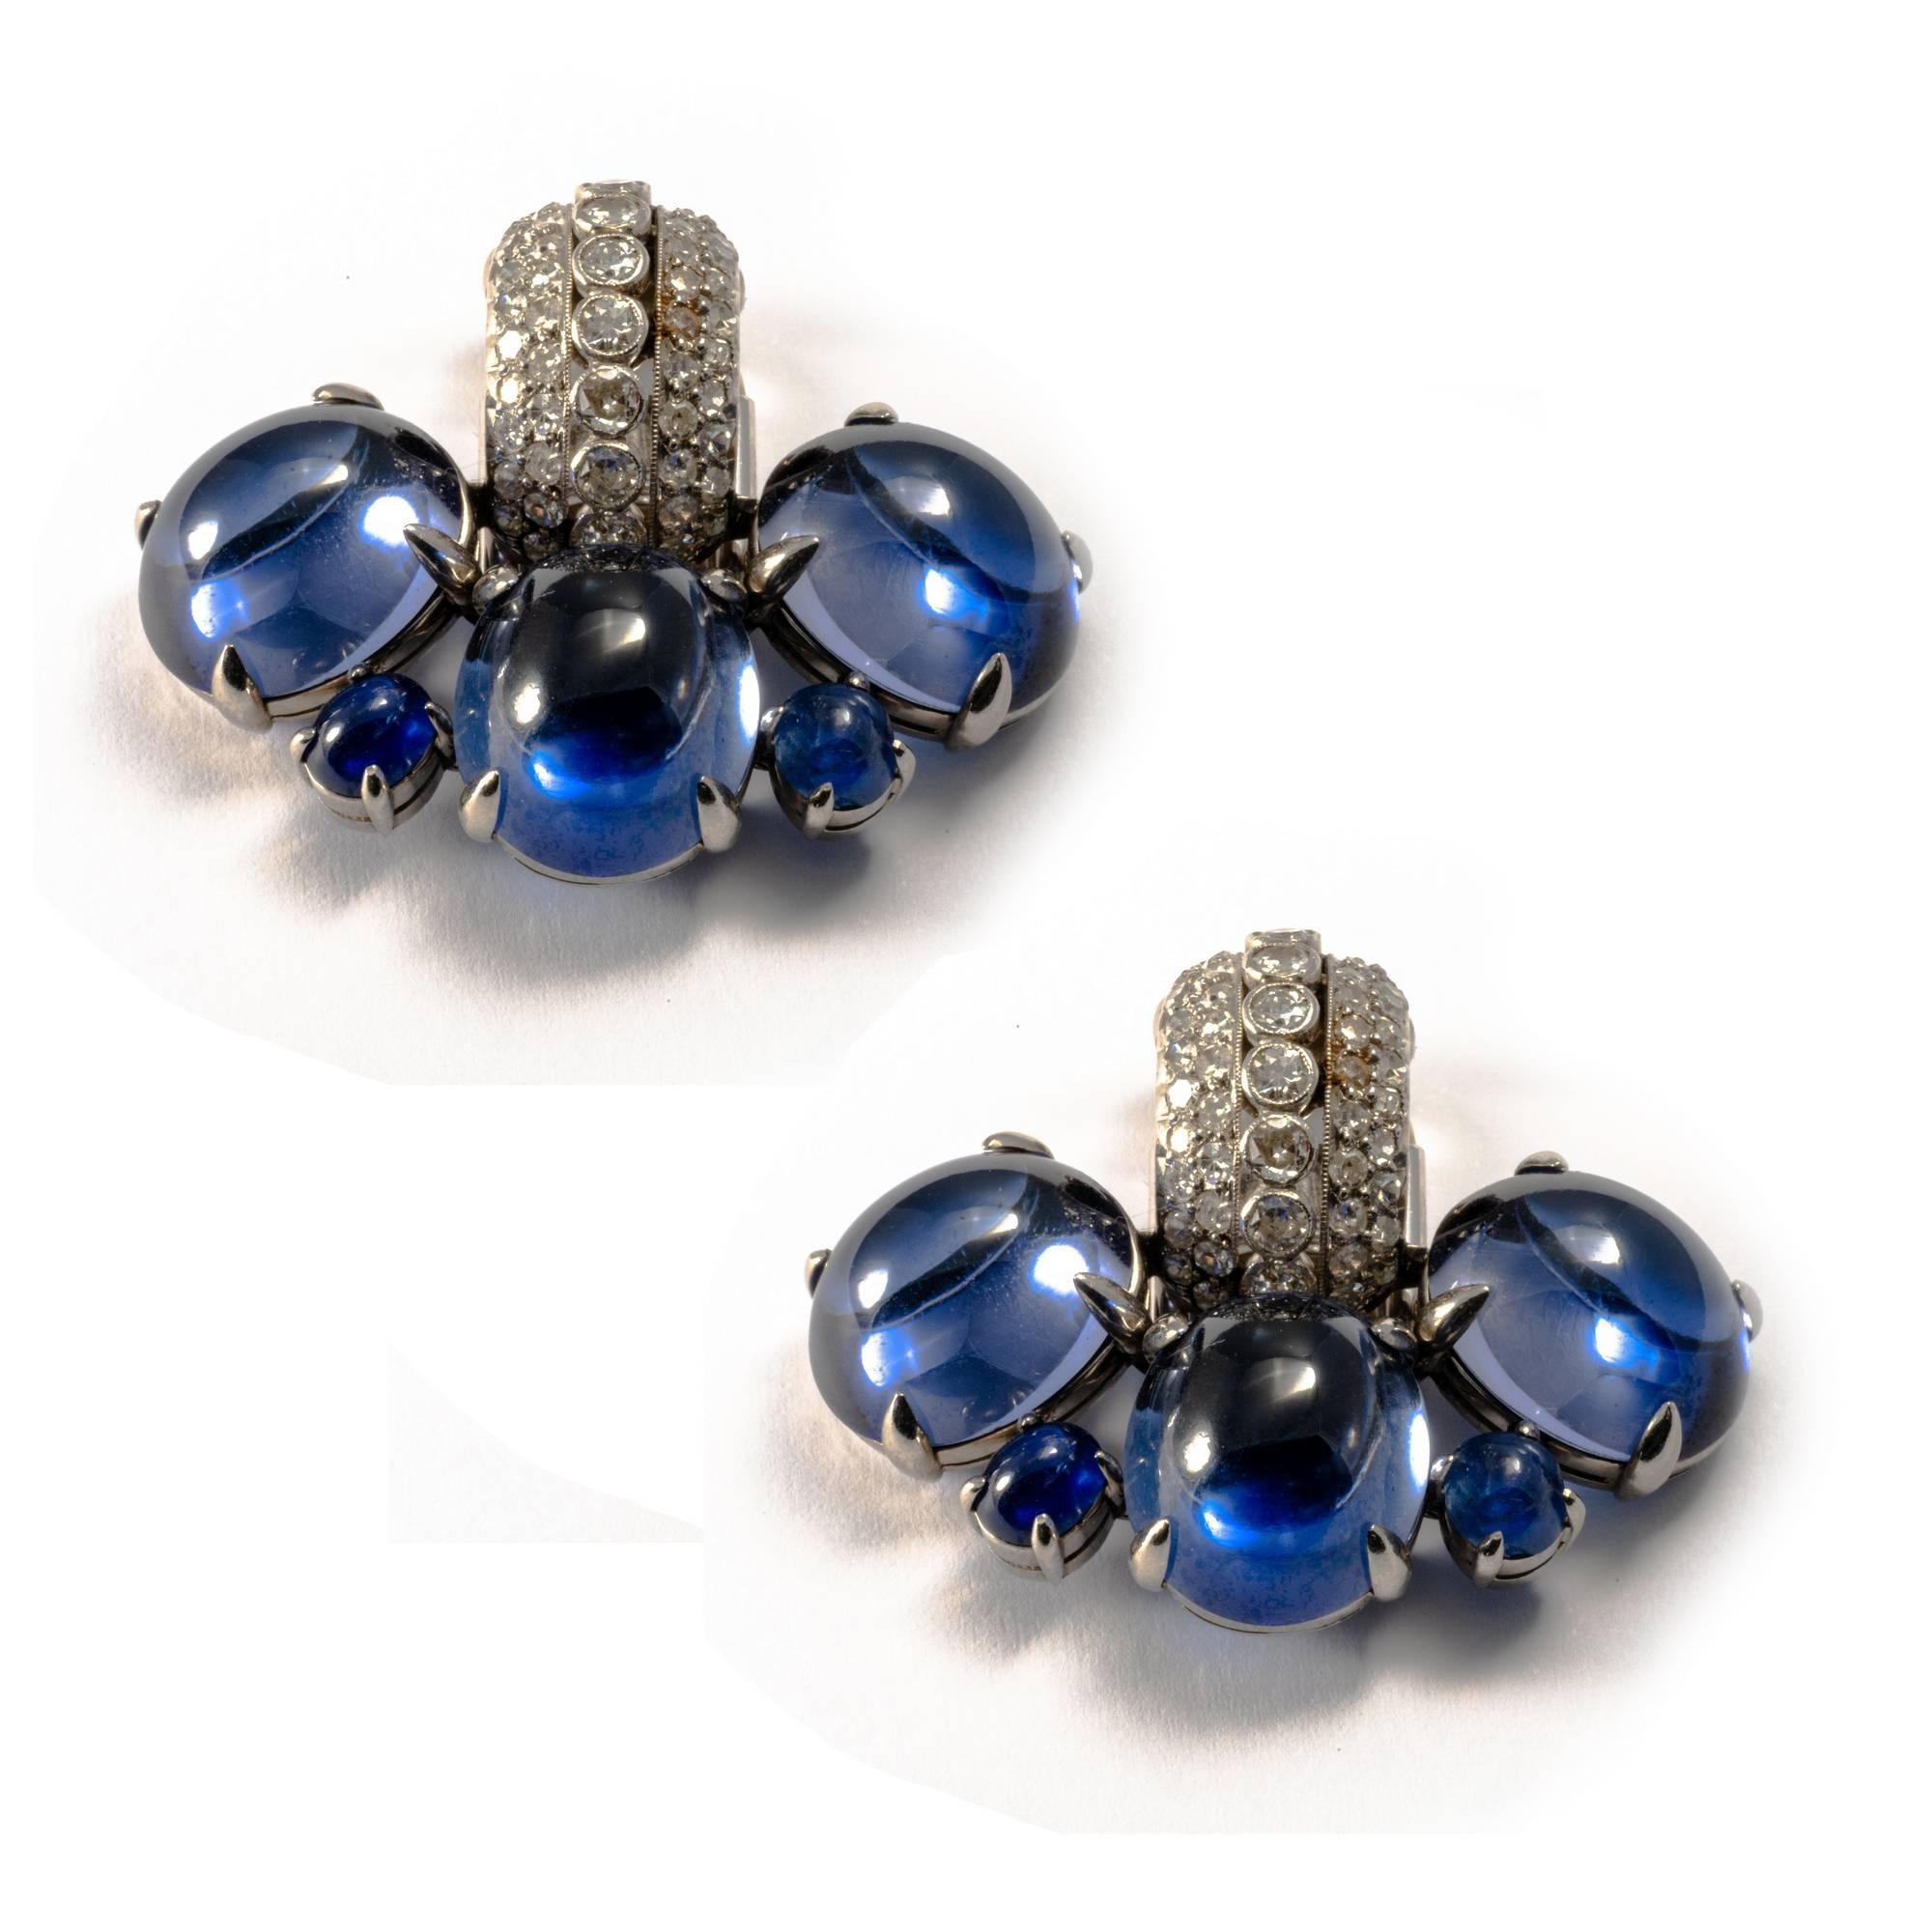 1980-1990 Cabochon Diamond and Sapphire 18K Gold Set Earrings and Pin Brooch For Sale 8